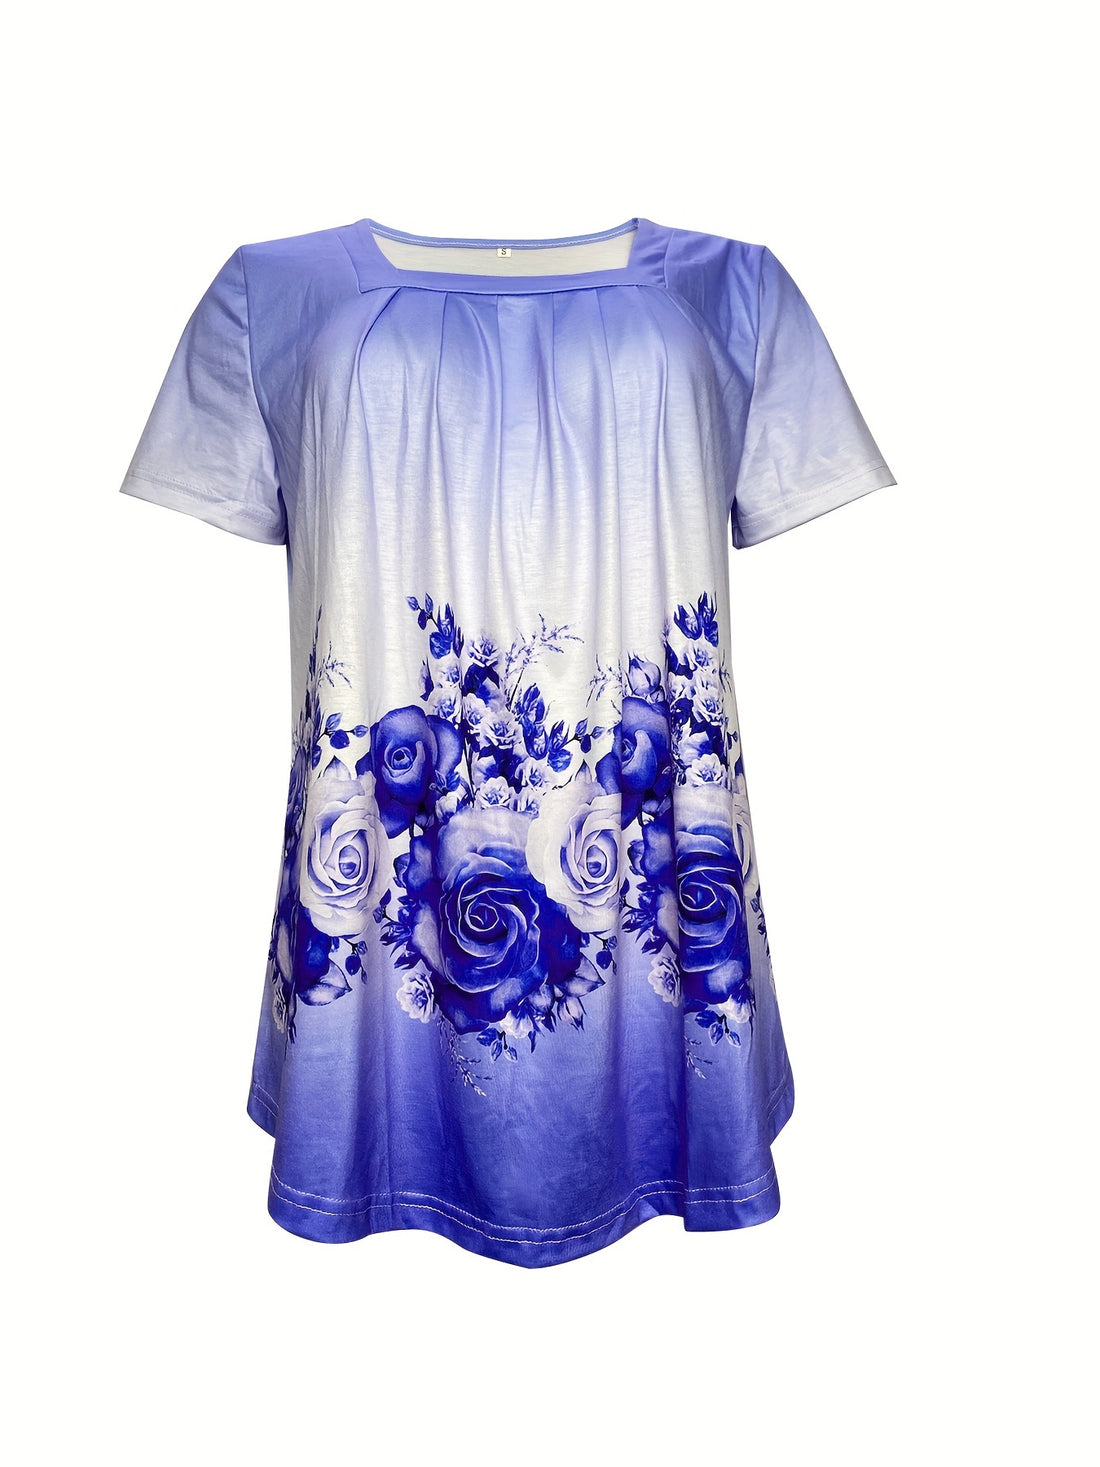 Floral Print T-Shirt, Casual Ombre Square Neck Short Sleeve T-Shirt